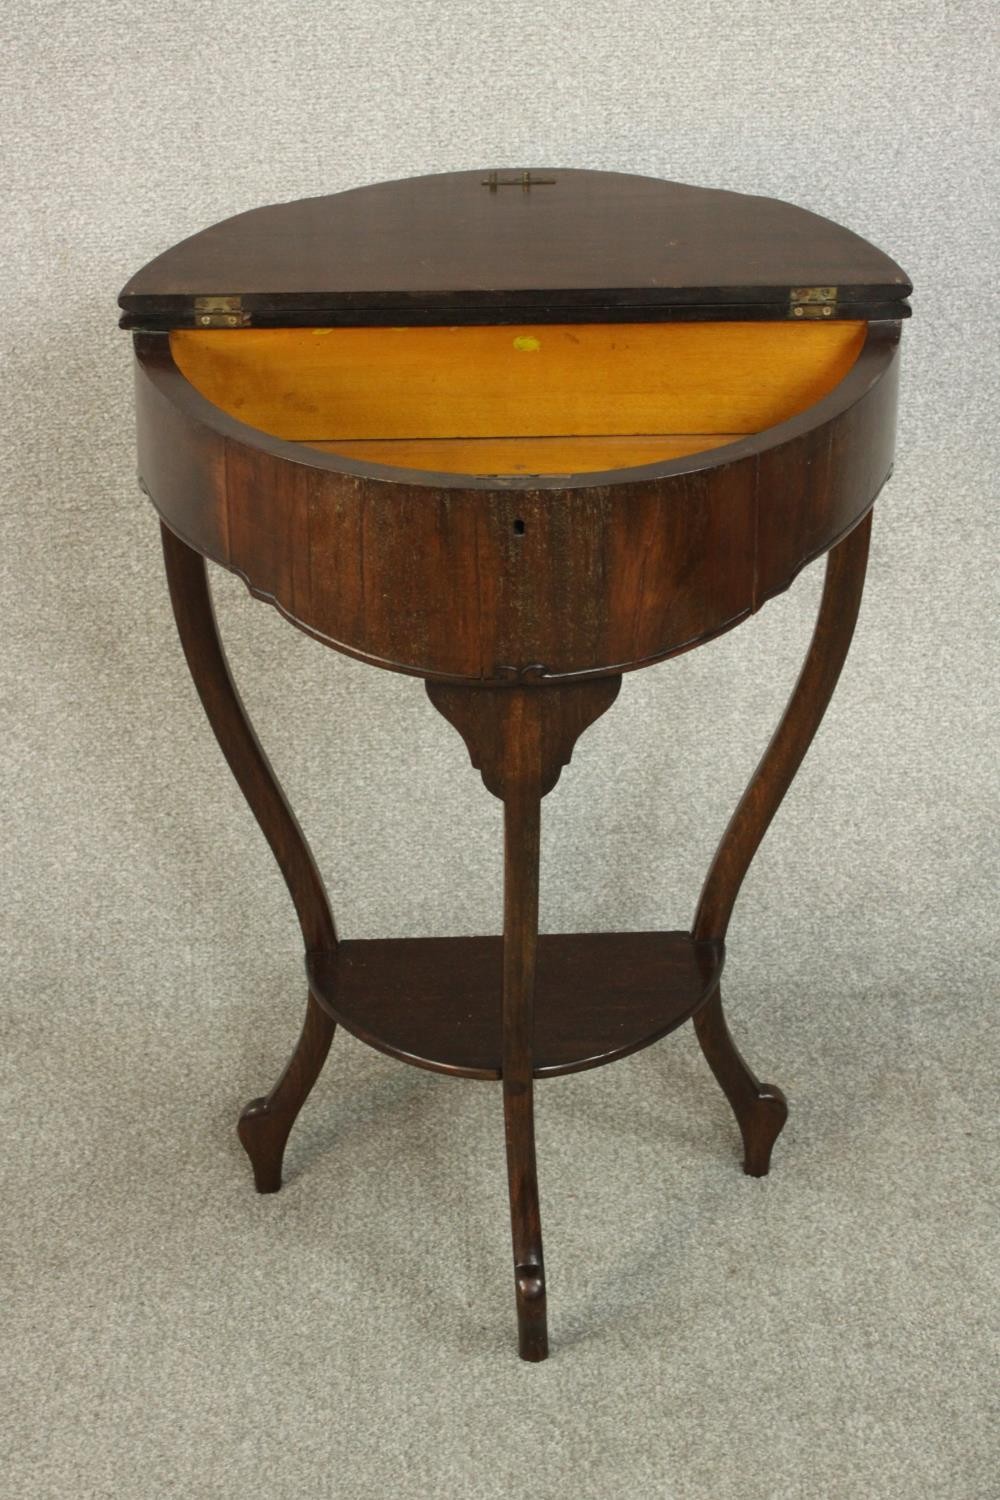 An early 20th century mahogany demi lune side table, with a foldover top opening to reveal a - Image 3 of 7